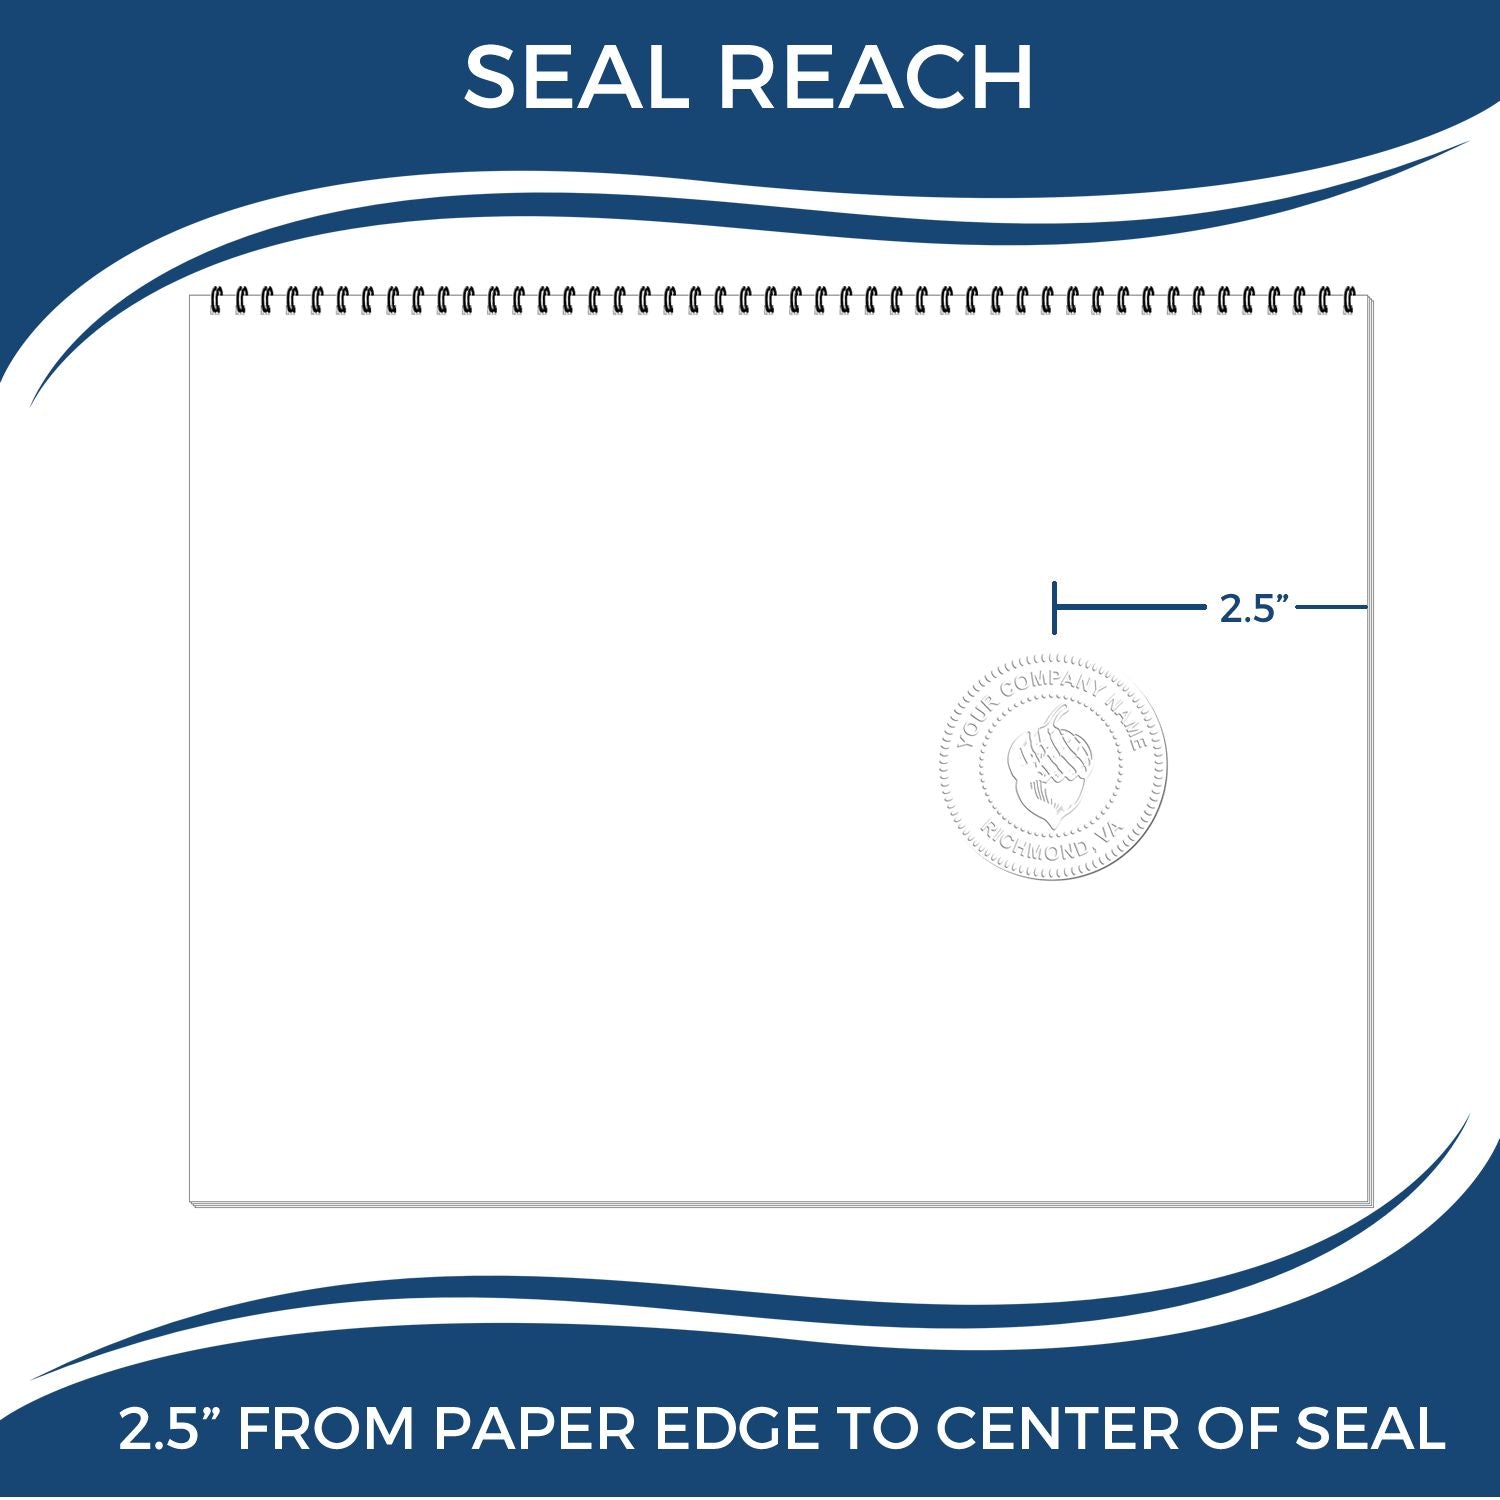 An infographic showing the seal reach which is represented by a ruler and a miniature seal image of the Long Reach Colorado PE Seal